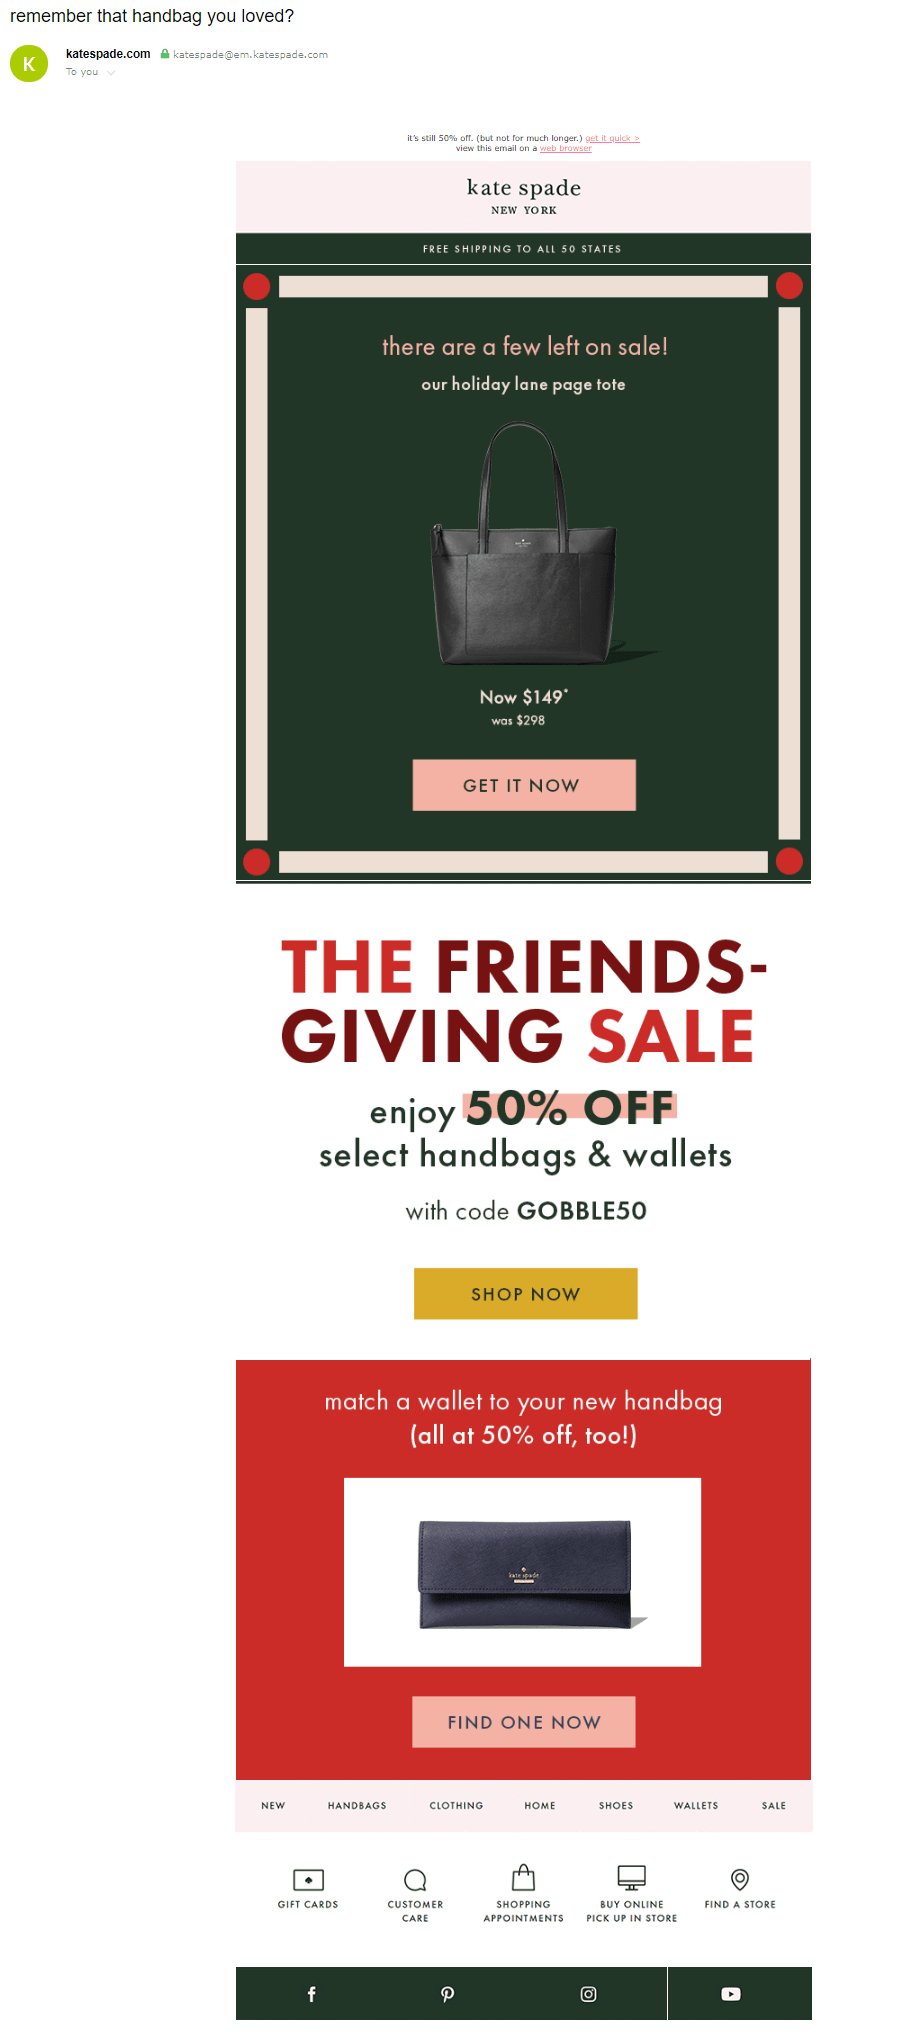 Email from Kate Spade